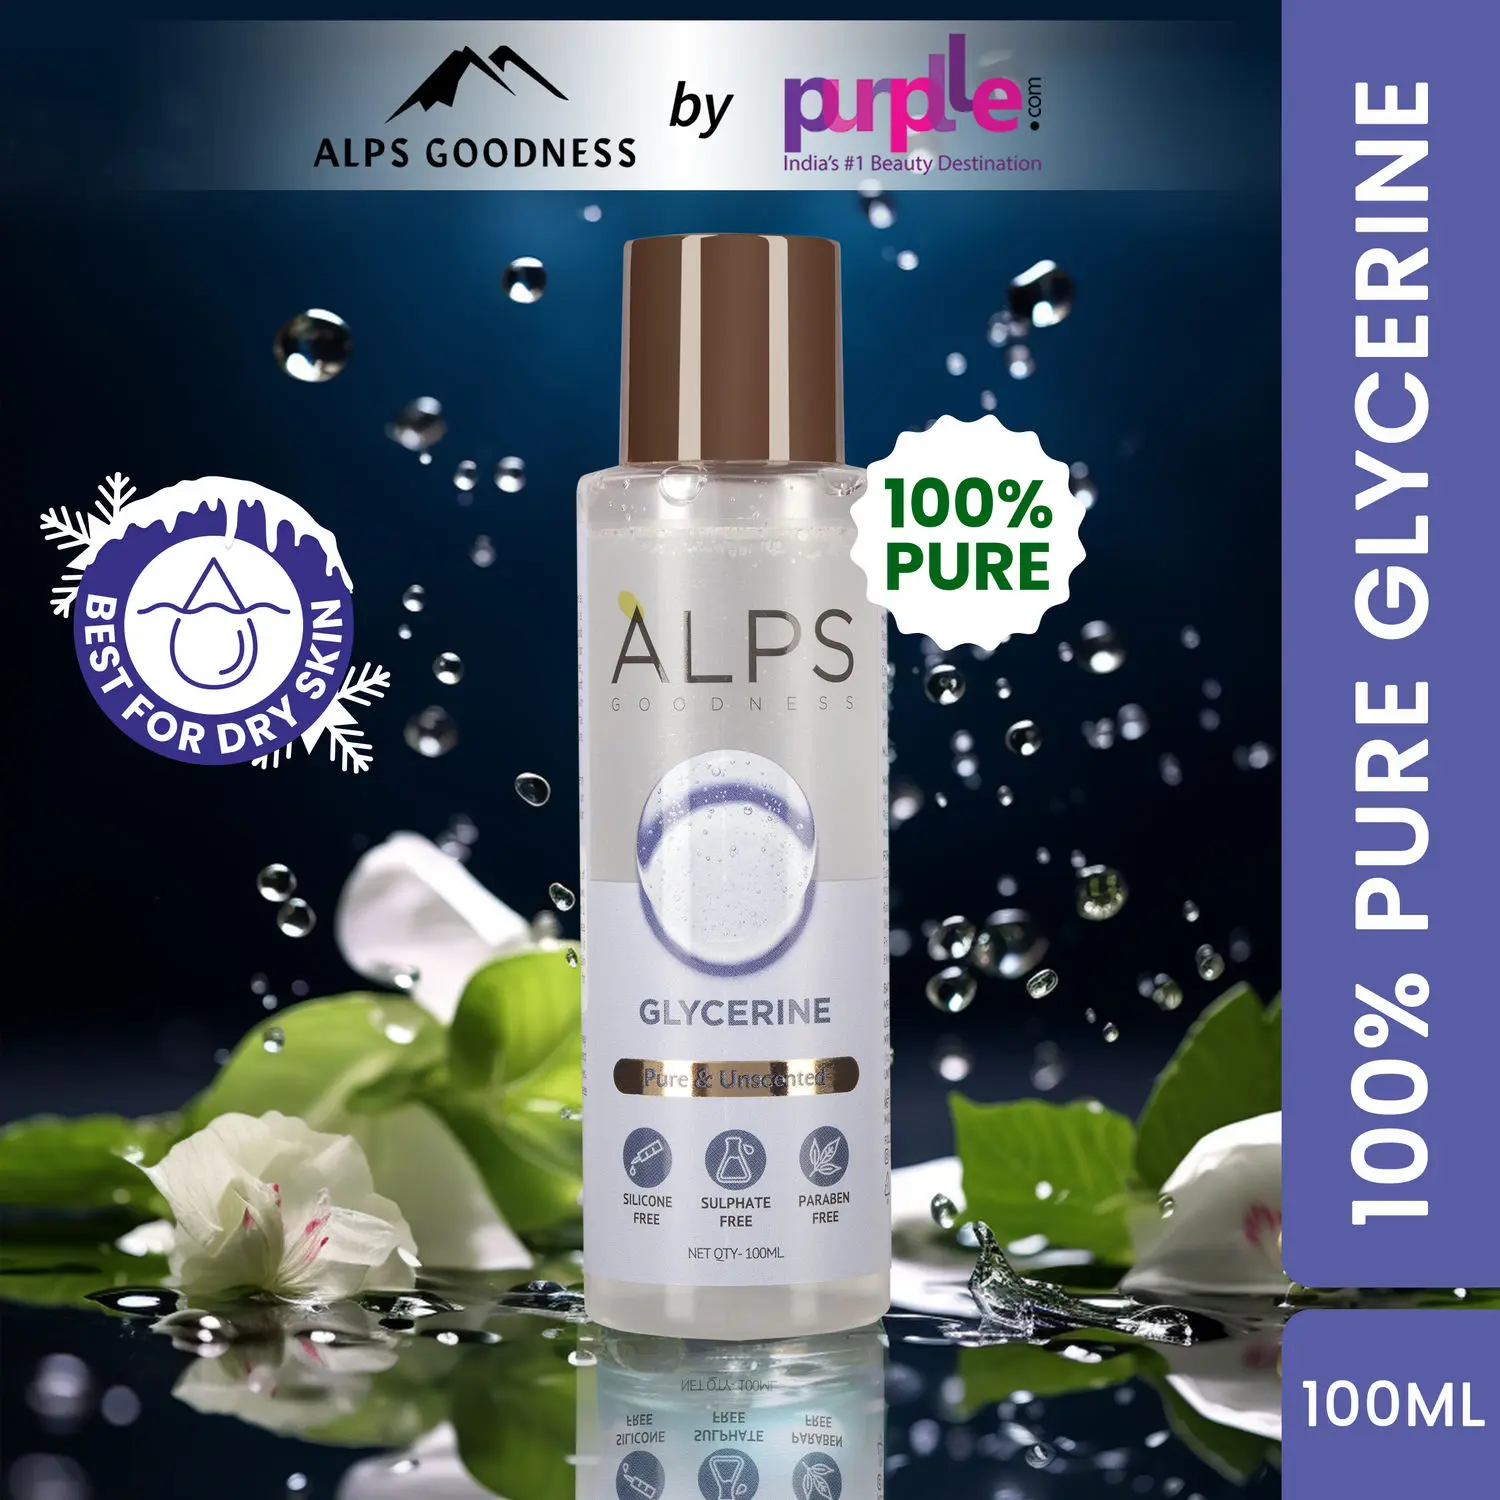 Alps Goodness 100% Pure Glycerine (100ml) | Super Hydrating - Best For Dry Skin | Silicon-Free, Paraben Free | Vegan | For Both Hair & Skin